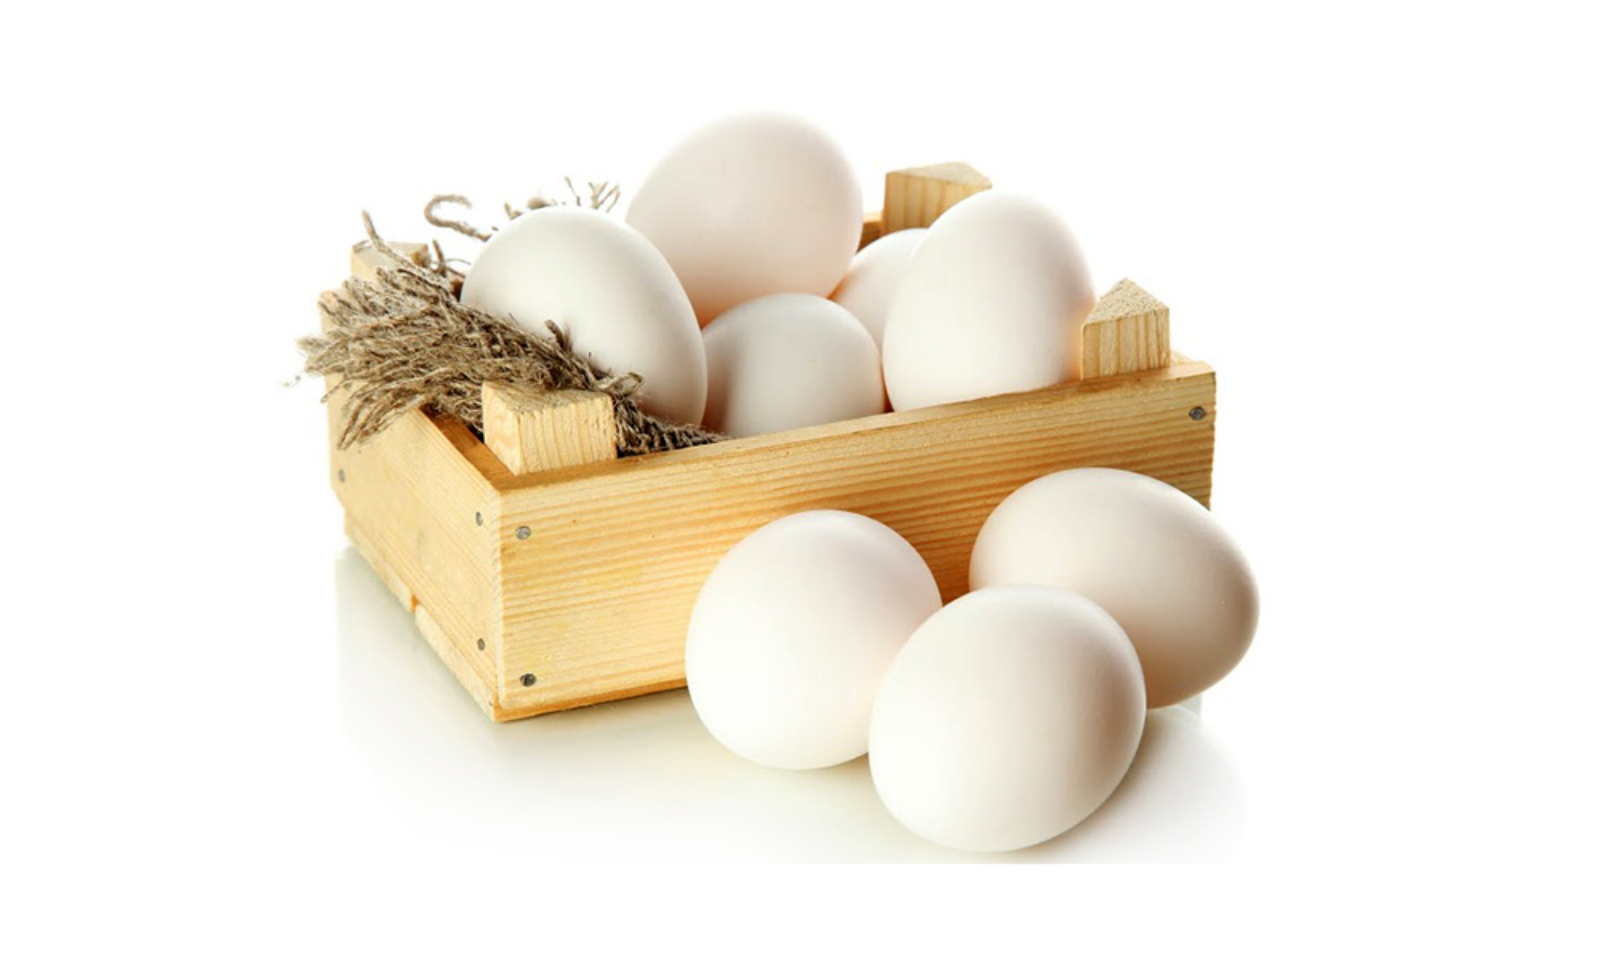 12 Health Benefits of Eating Eggs